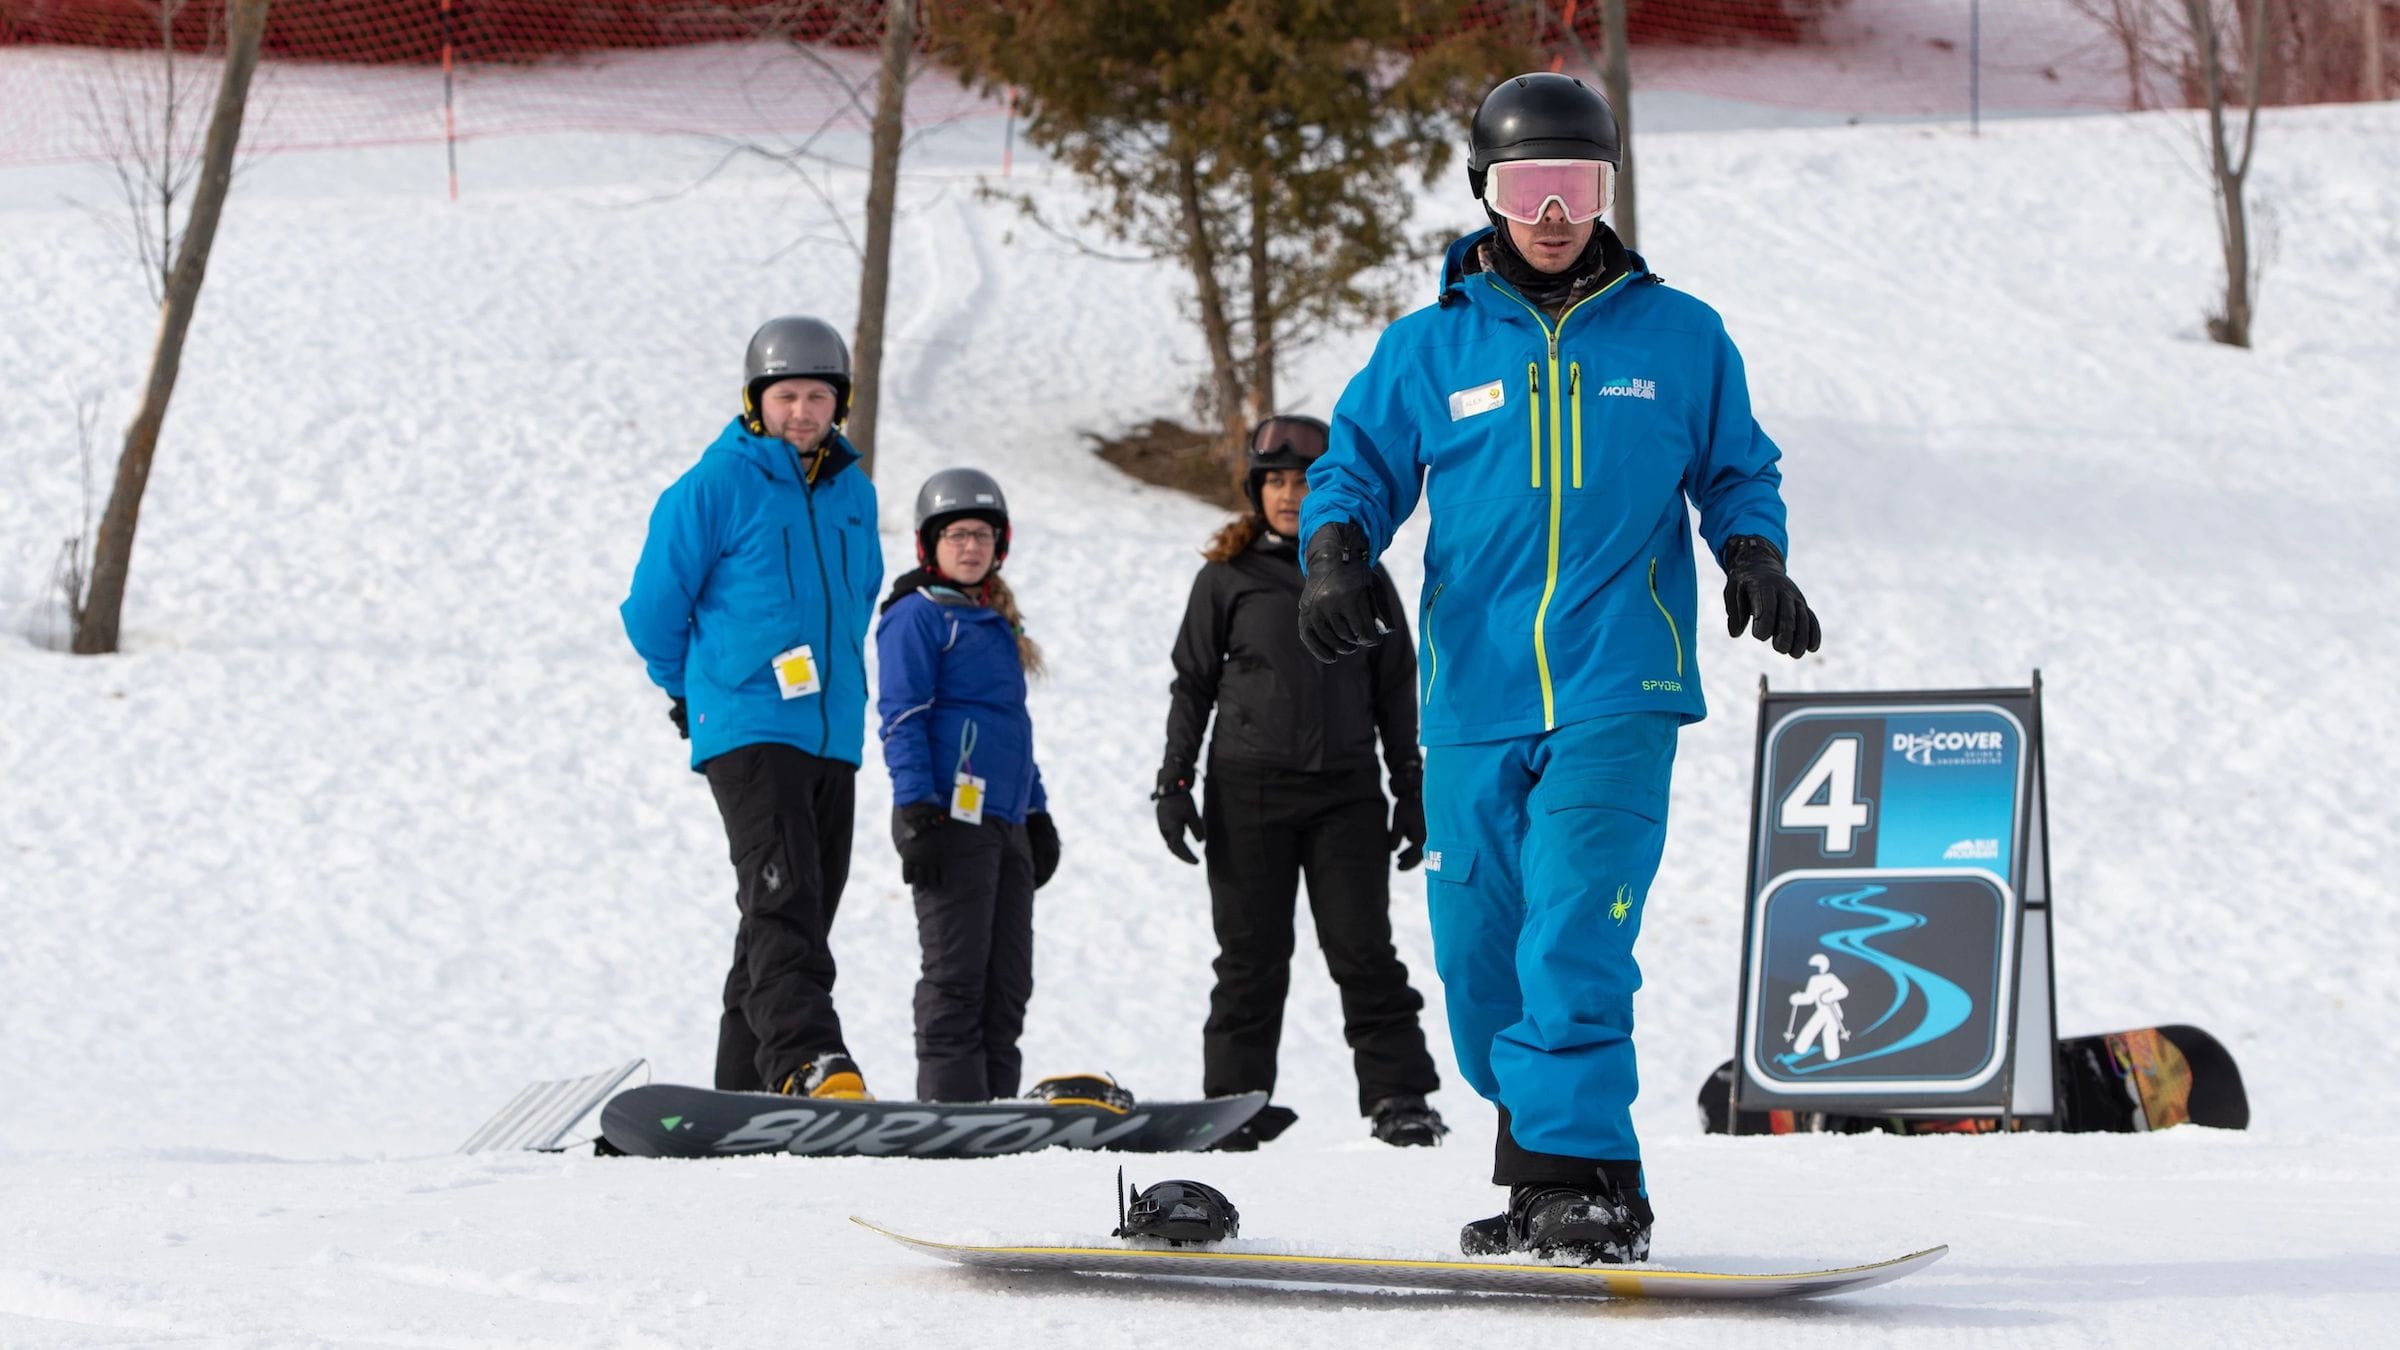 New Snowboarder with instructor during Beginner Snowboard Lessons at Blue Mountain